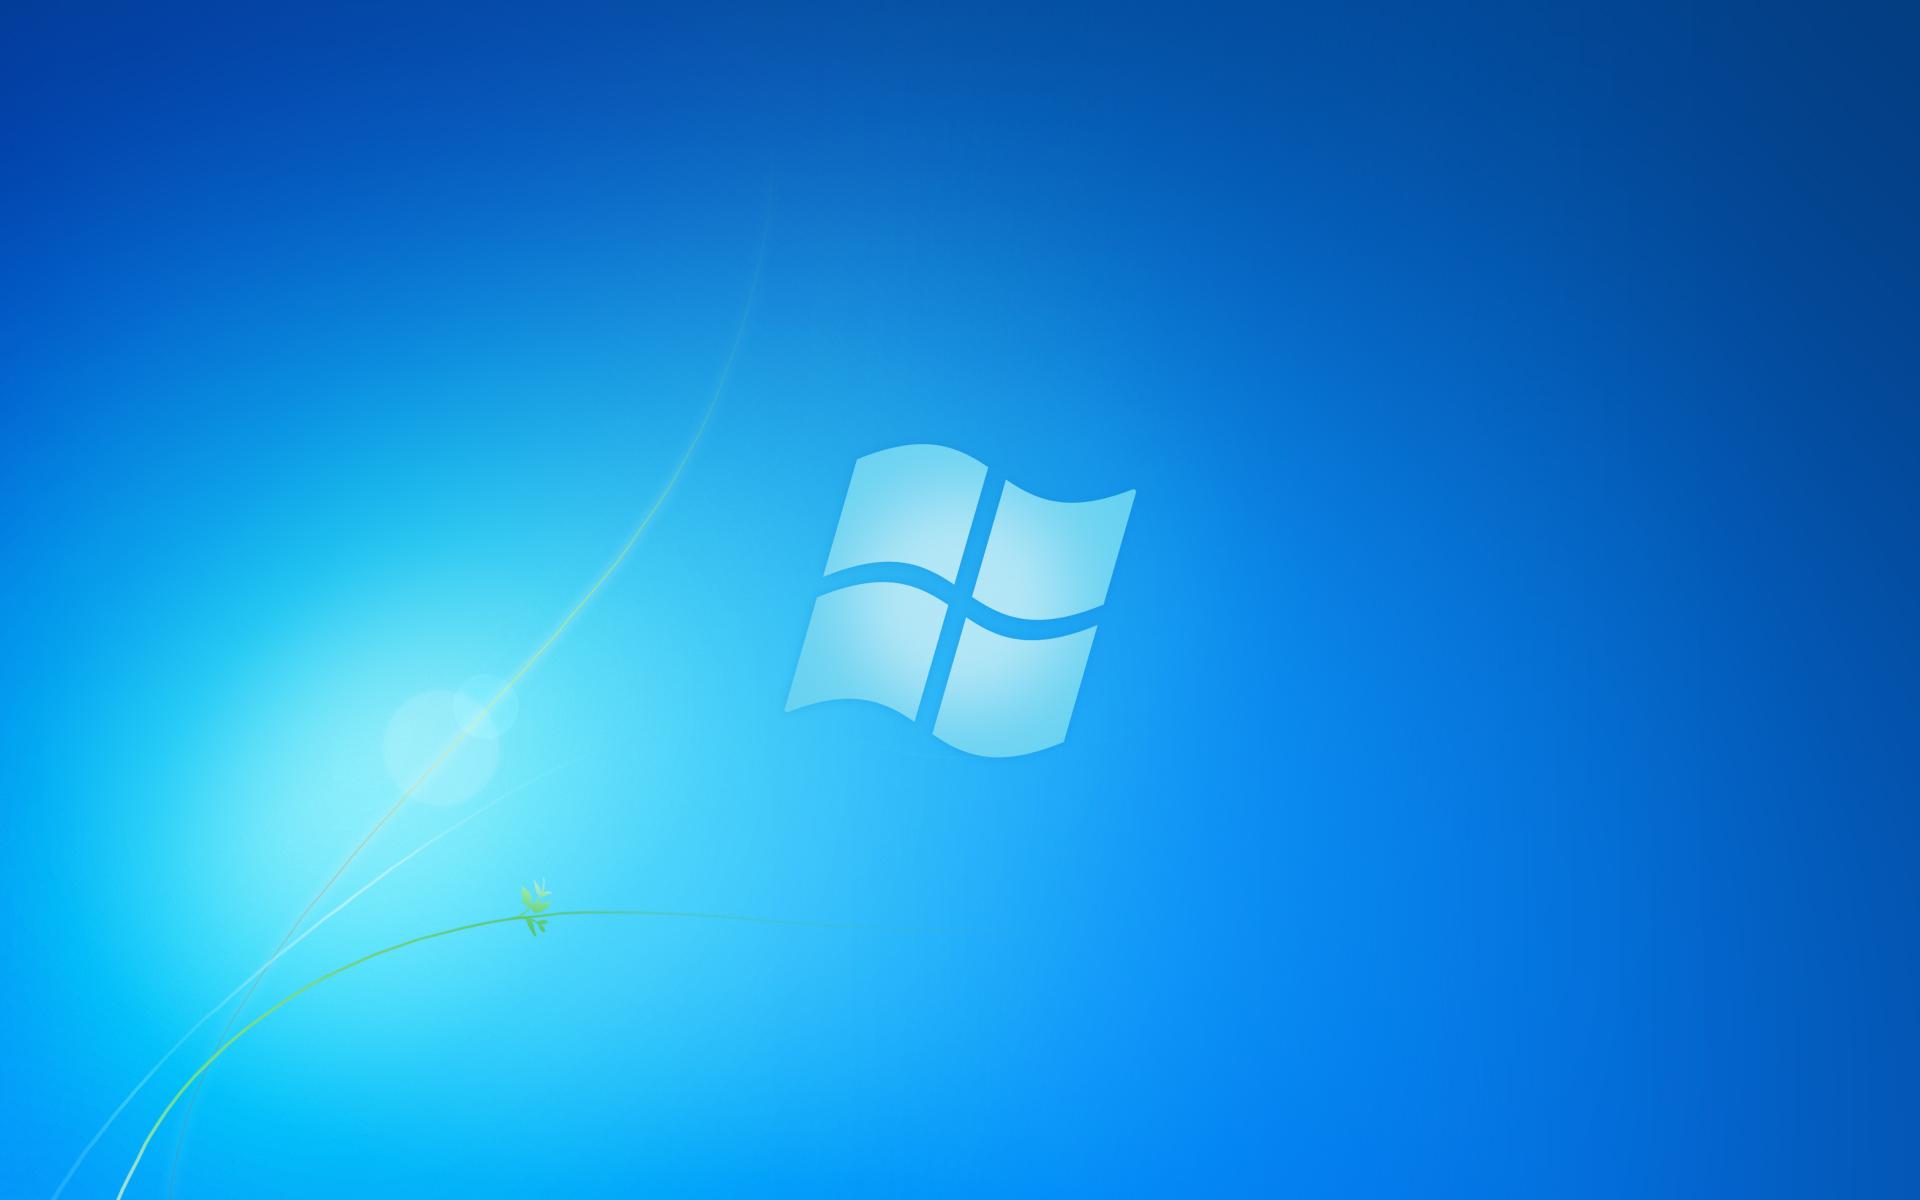 Windows 7 ( This took a long time to make )